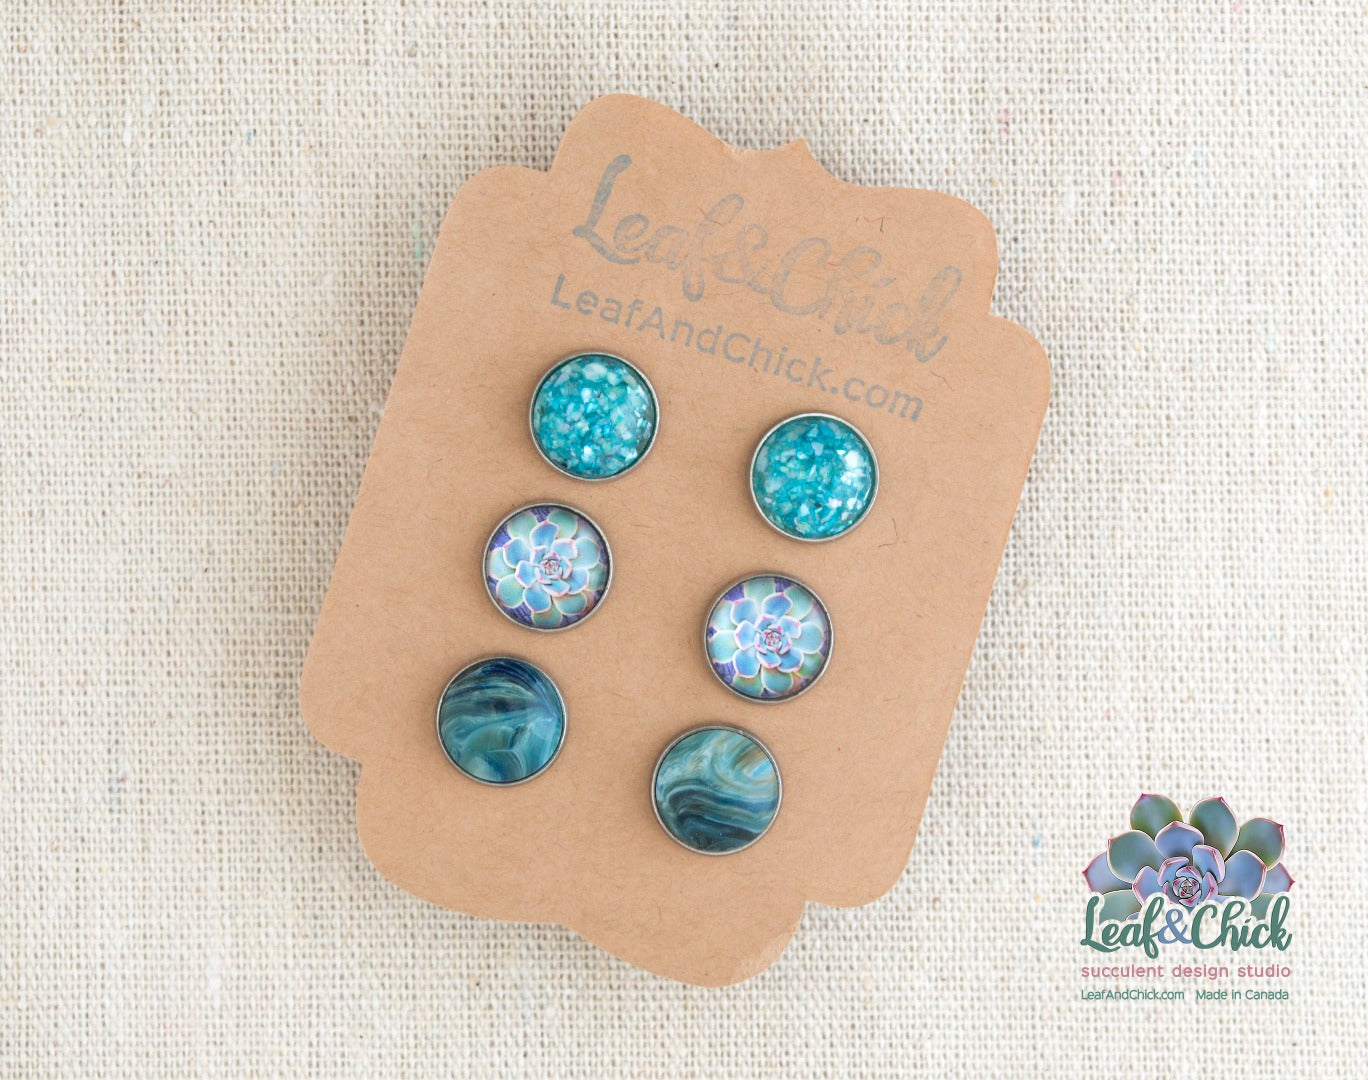 3 pairs of stud earrings in shades of blue